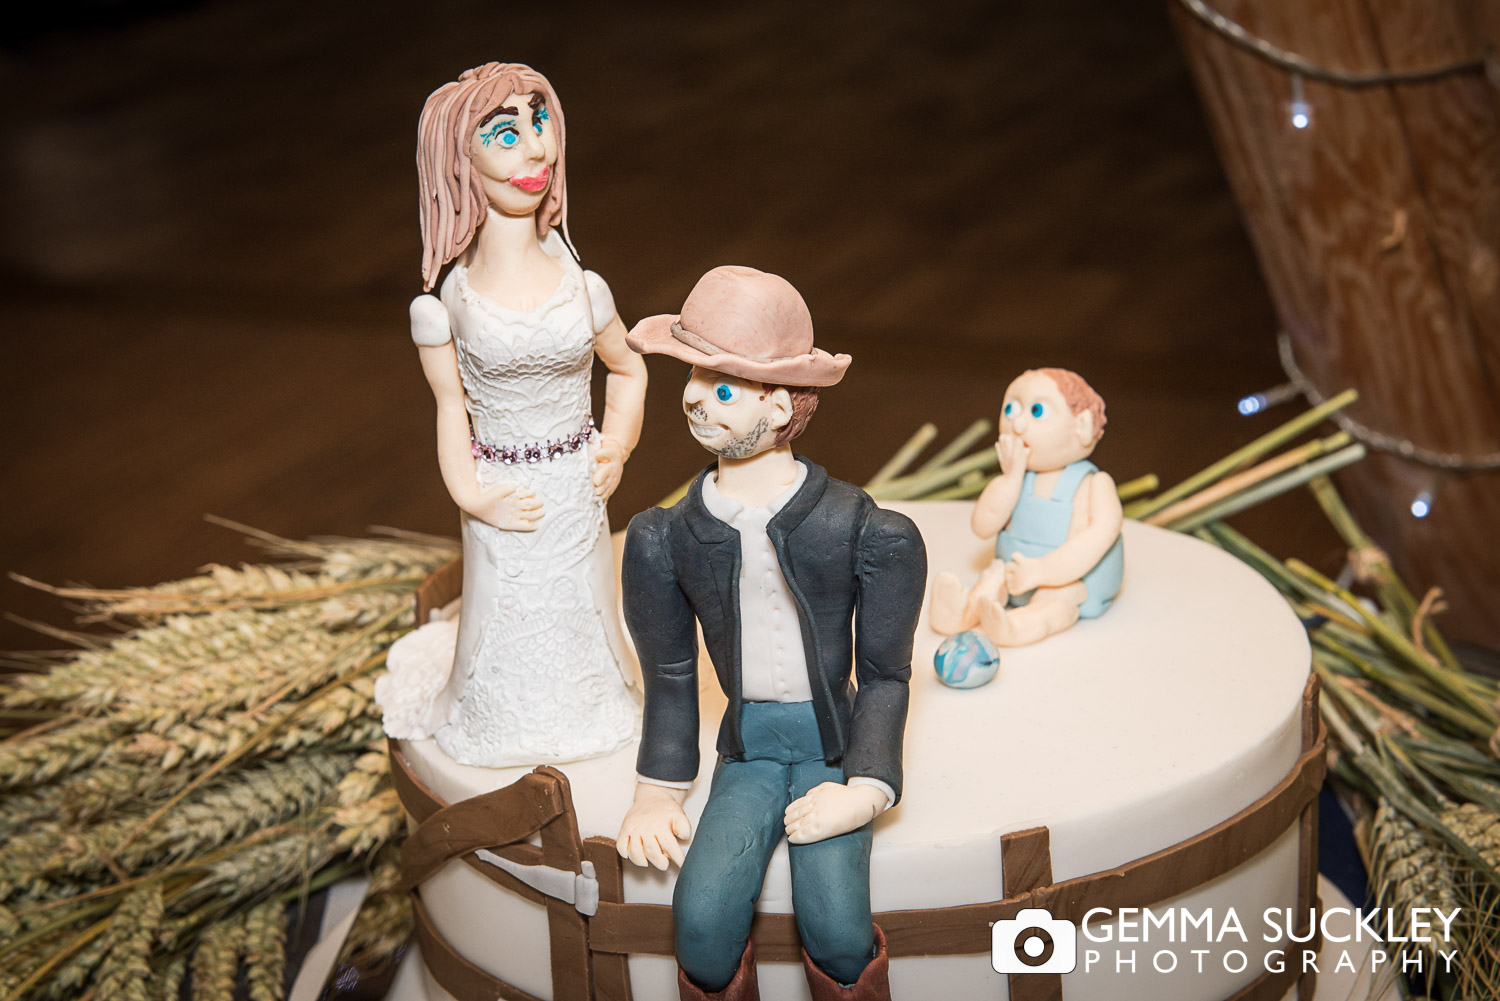 themed wedding cake of bride and groom